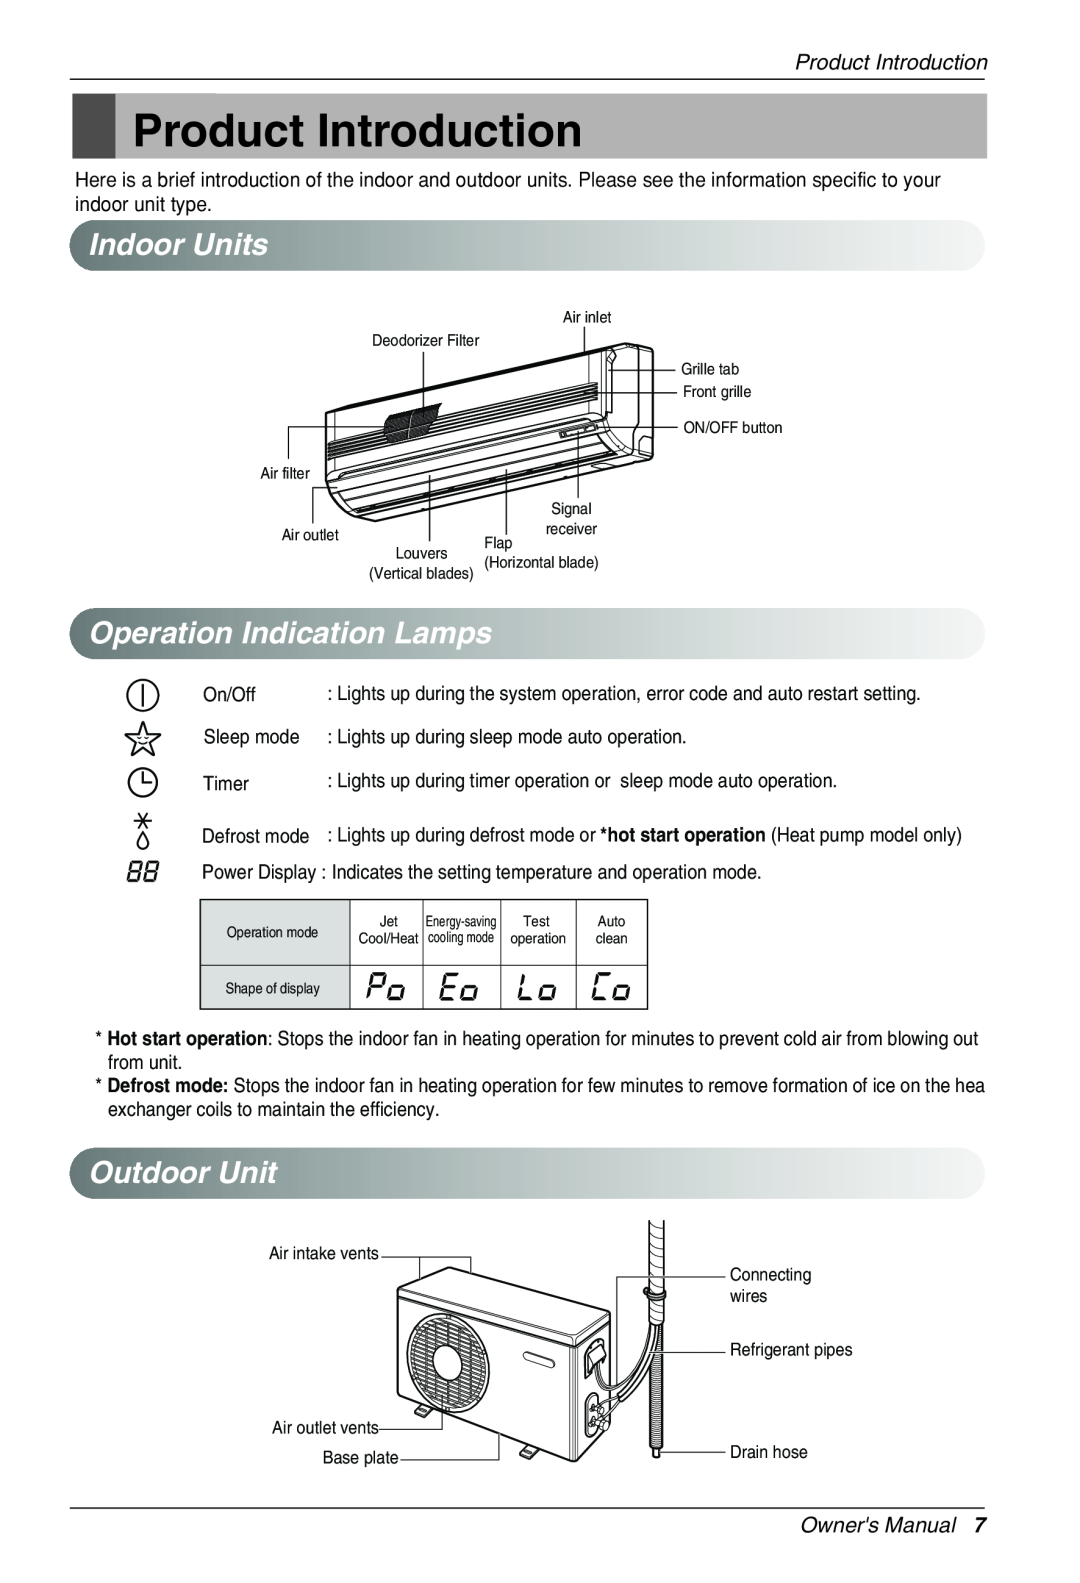 Heat Controller VMH30SB-1 specifications Product Introduction, IndoorUnits, OperationIndicationLamps, OutdoorUnit 